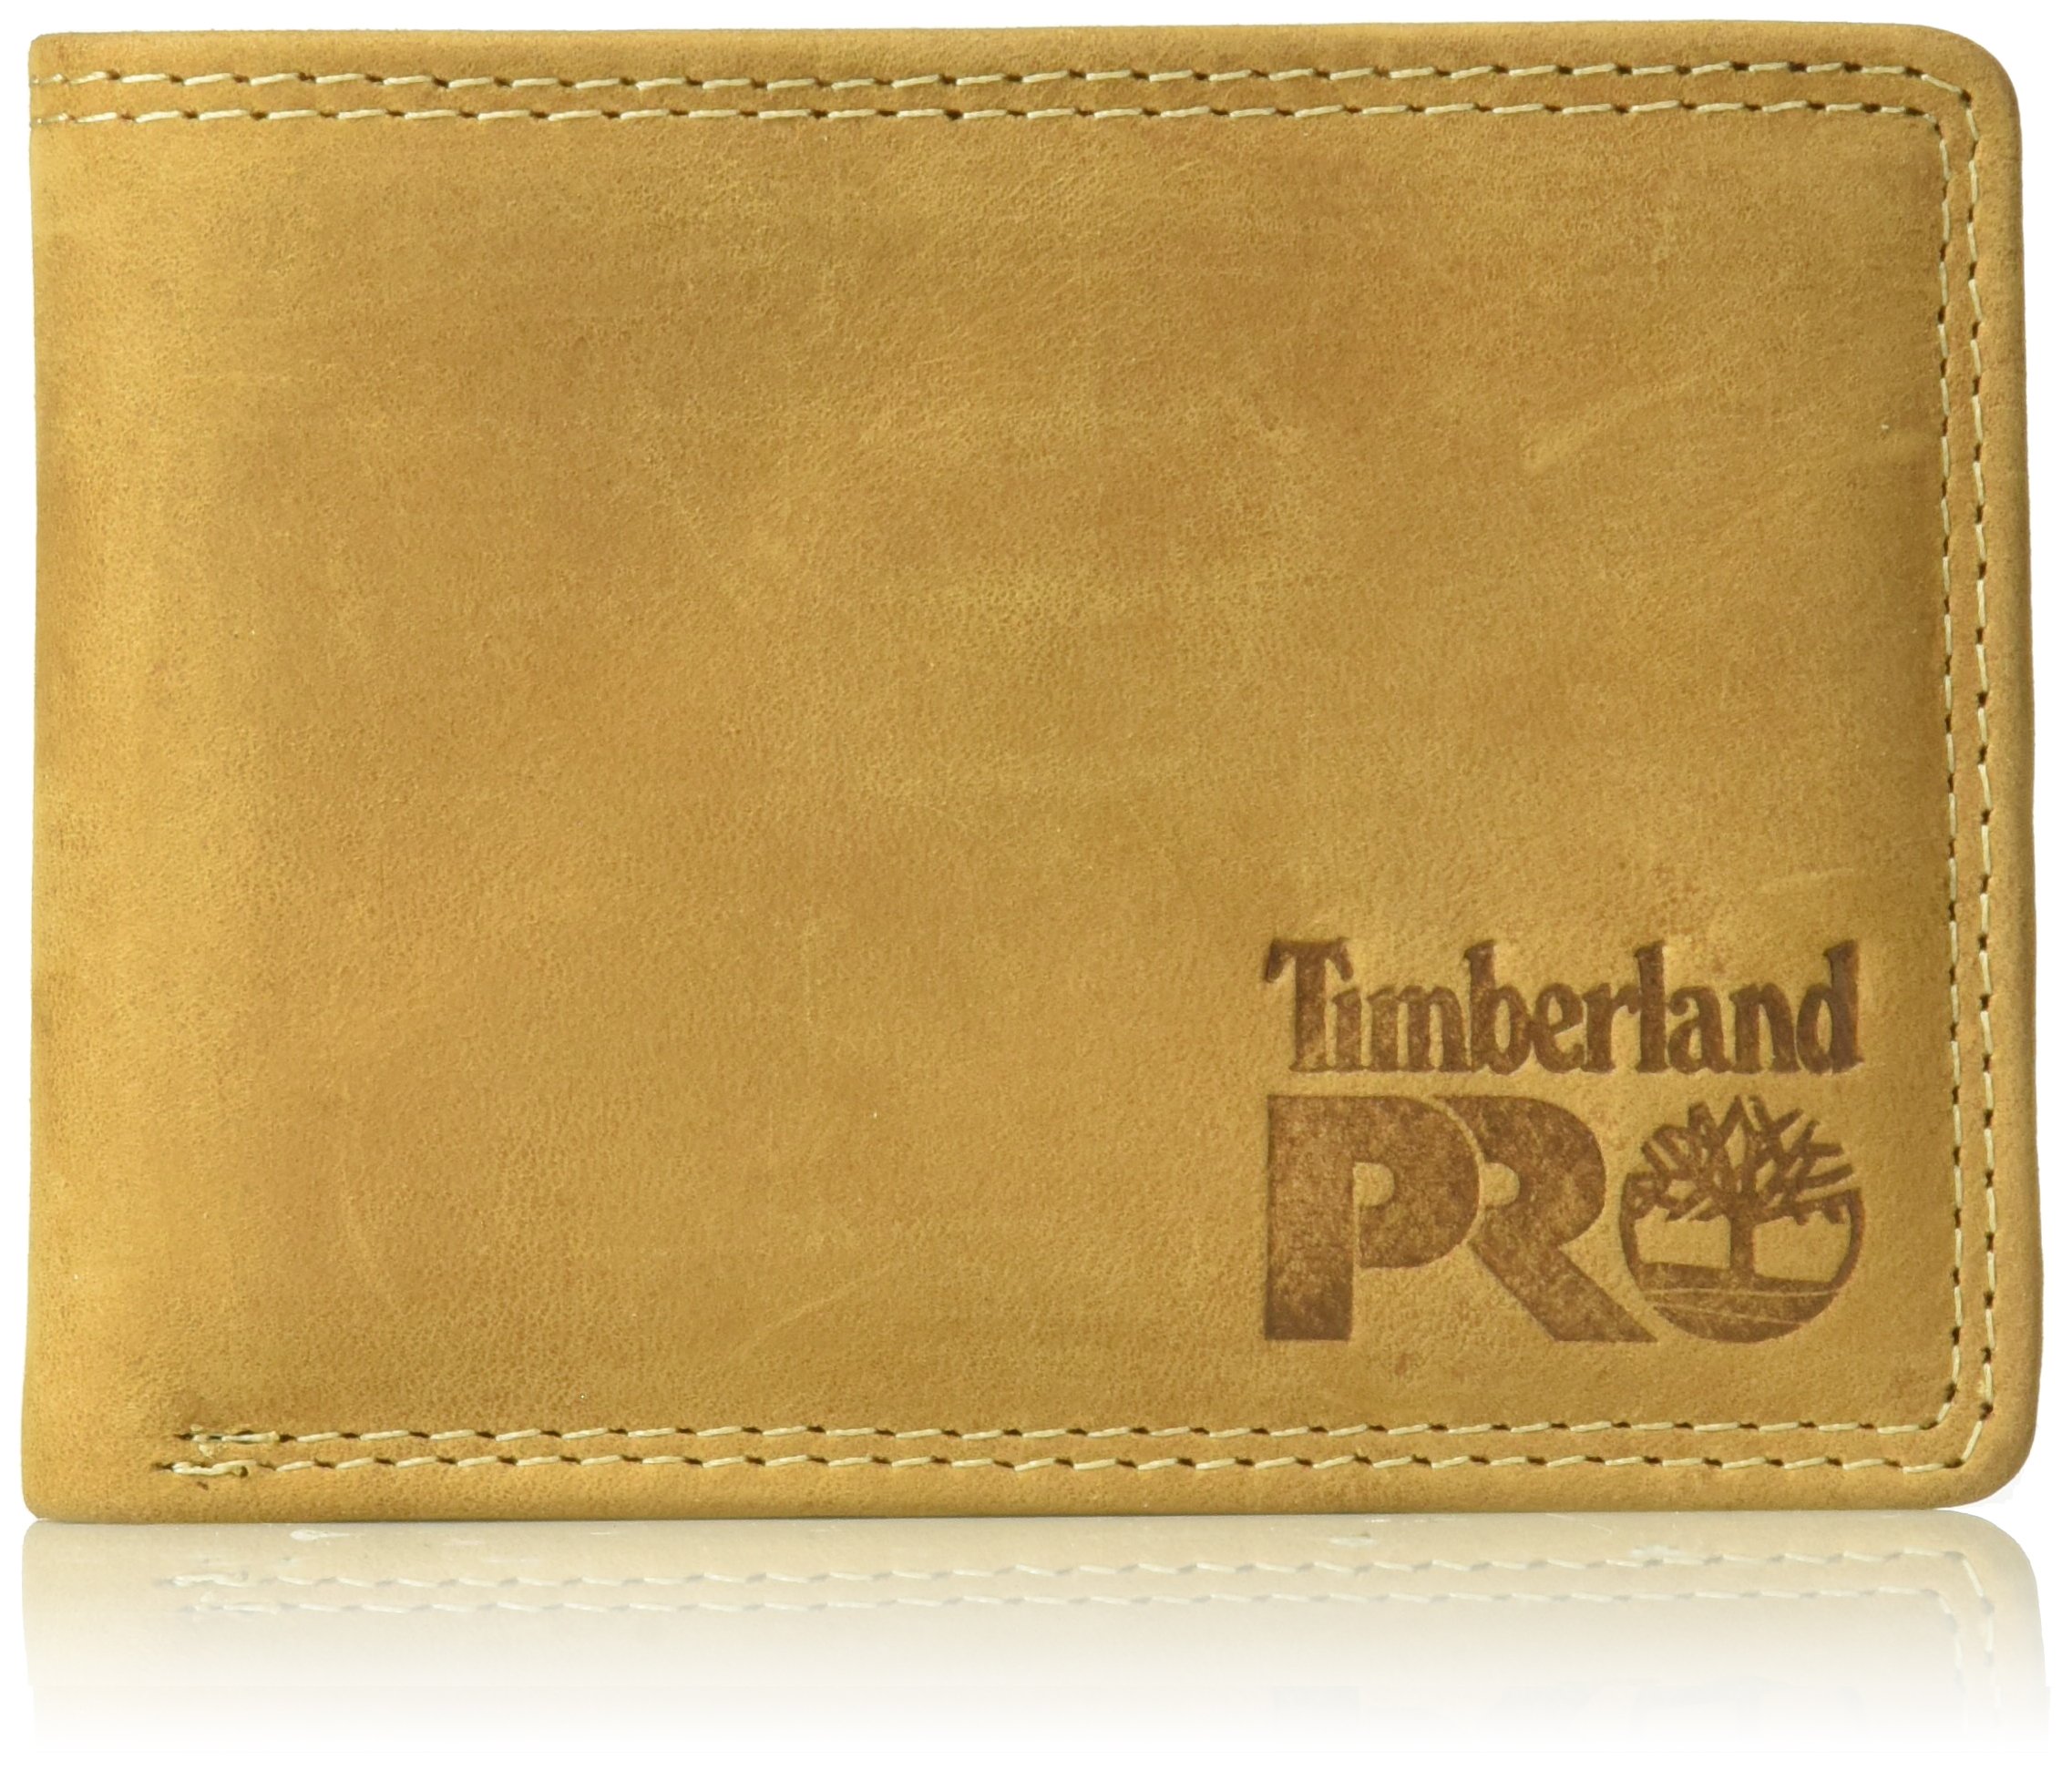 Timberland PRO Men's Leather RFID Wallet with Removable Flip Pocket Card Carrier